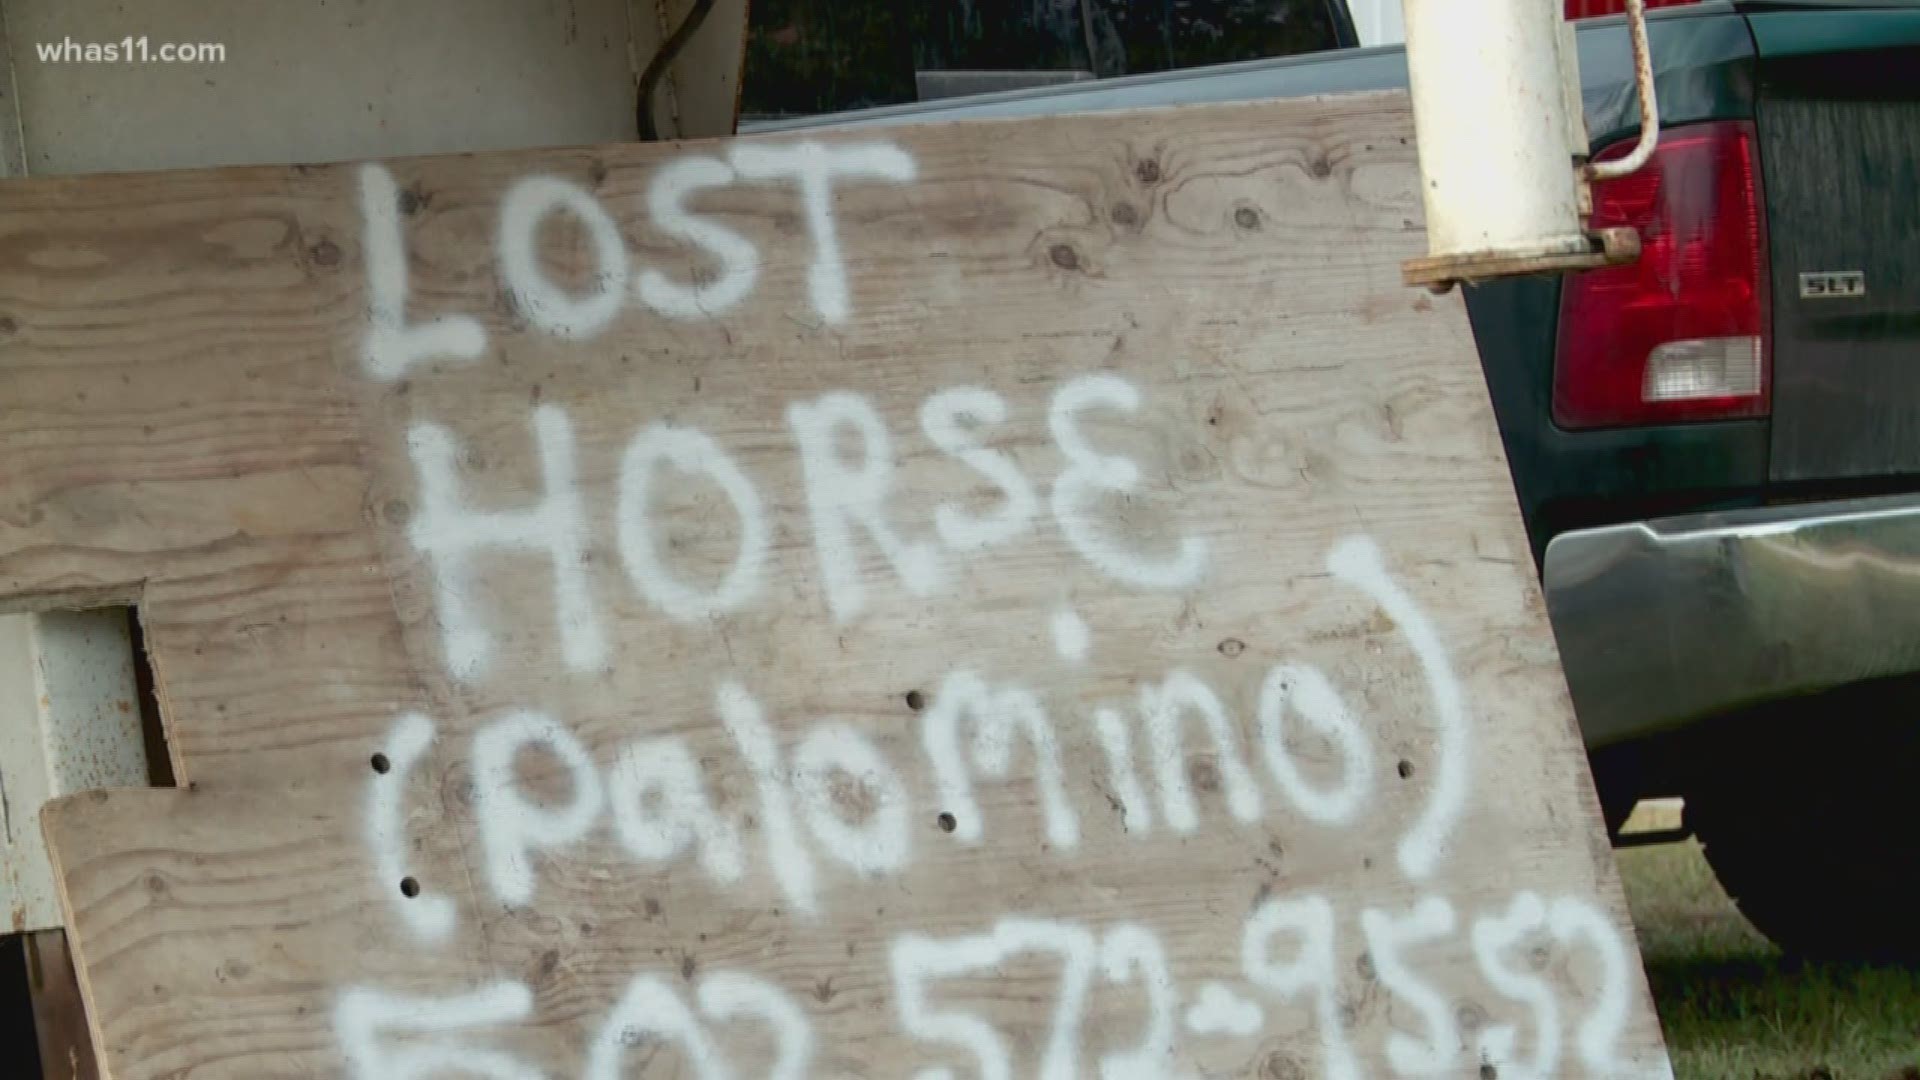 An Indiana family is searching for their beloved horse who went missing after a storm in August.